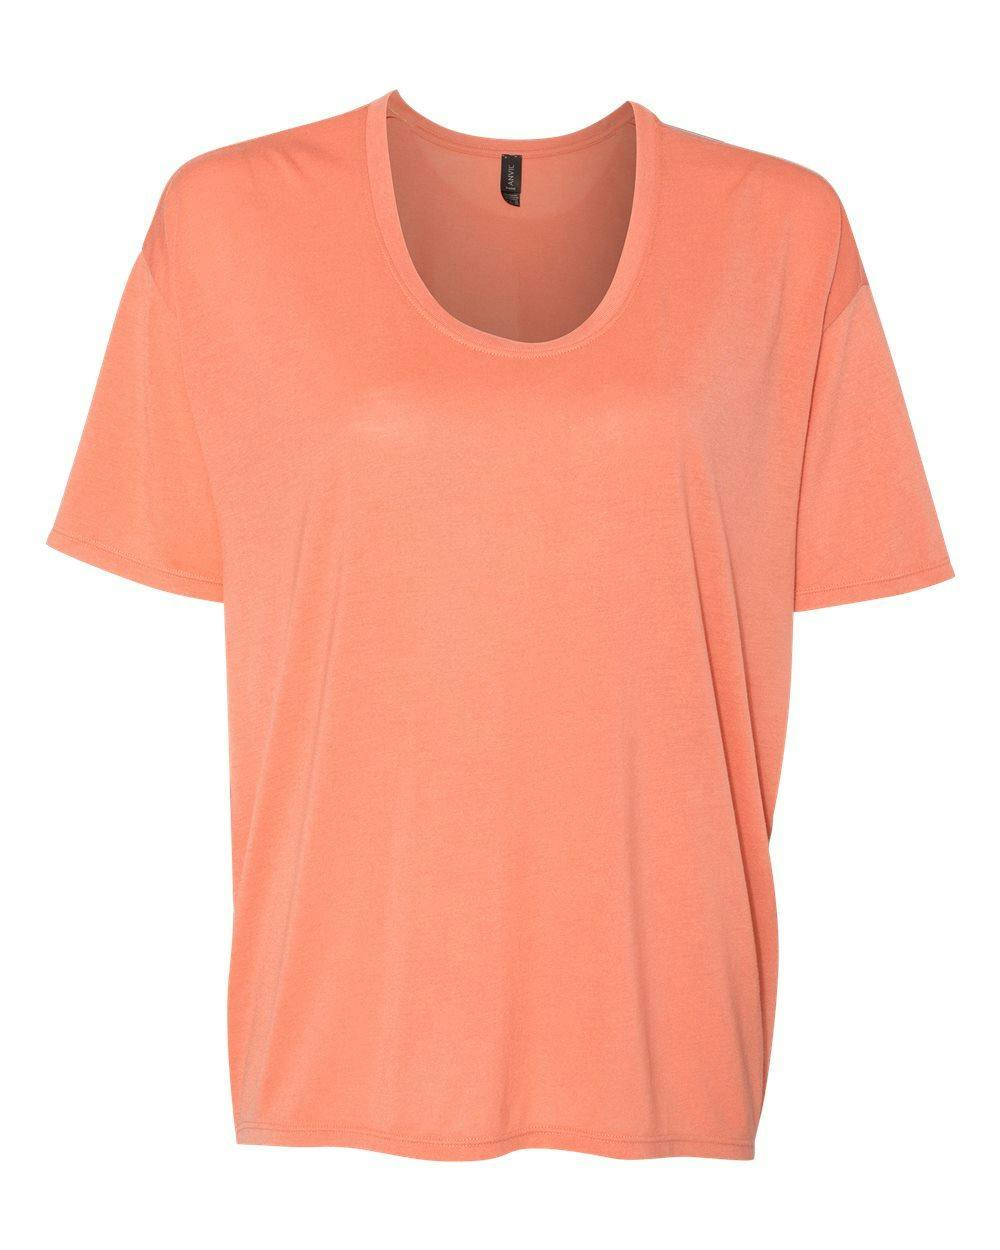 Image for Women’s Freedom Drop Shoulder T-Shirt - 36PVL